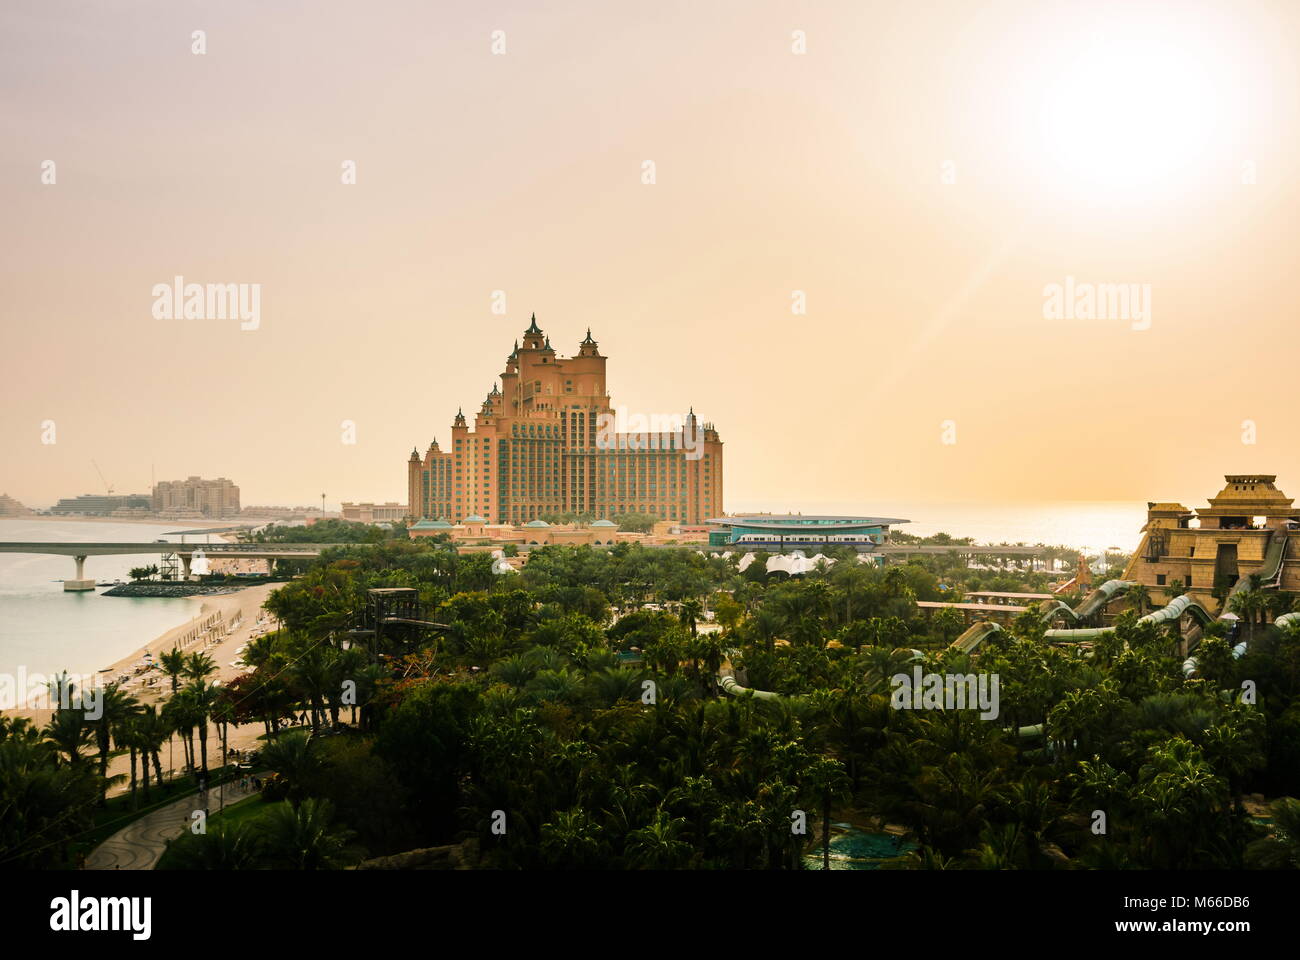 Dubai, United Arab Emirates - February 24, 2018: Atlantis hotel and water park panorama on the Palm Jumeirah island, view from the water park, tourist Stock Photo